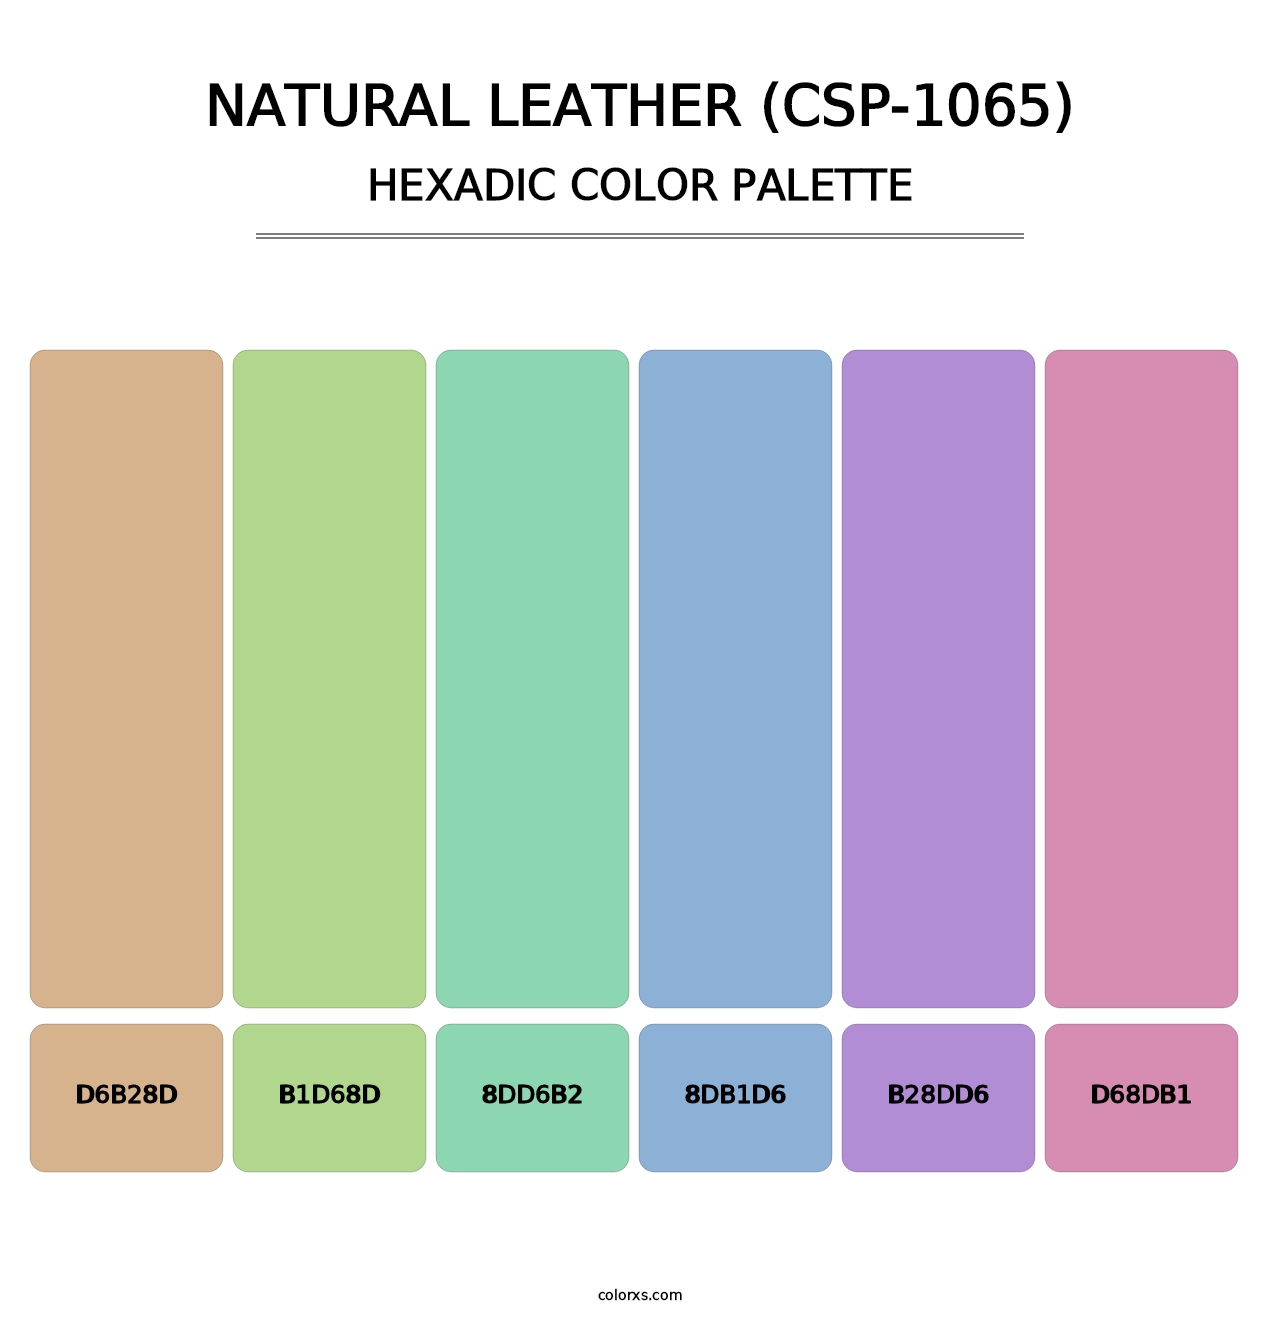 Natural Leather (CSP-1065) - Hexadic Color Palette